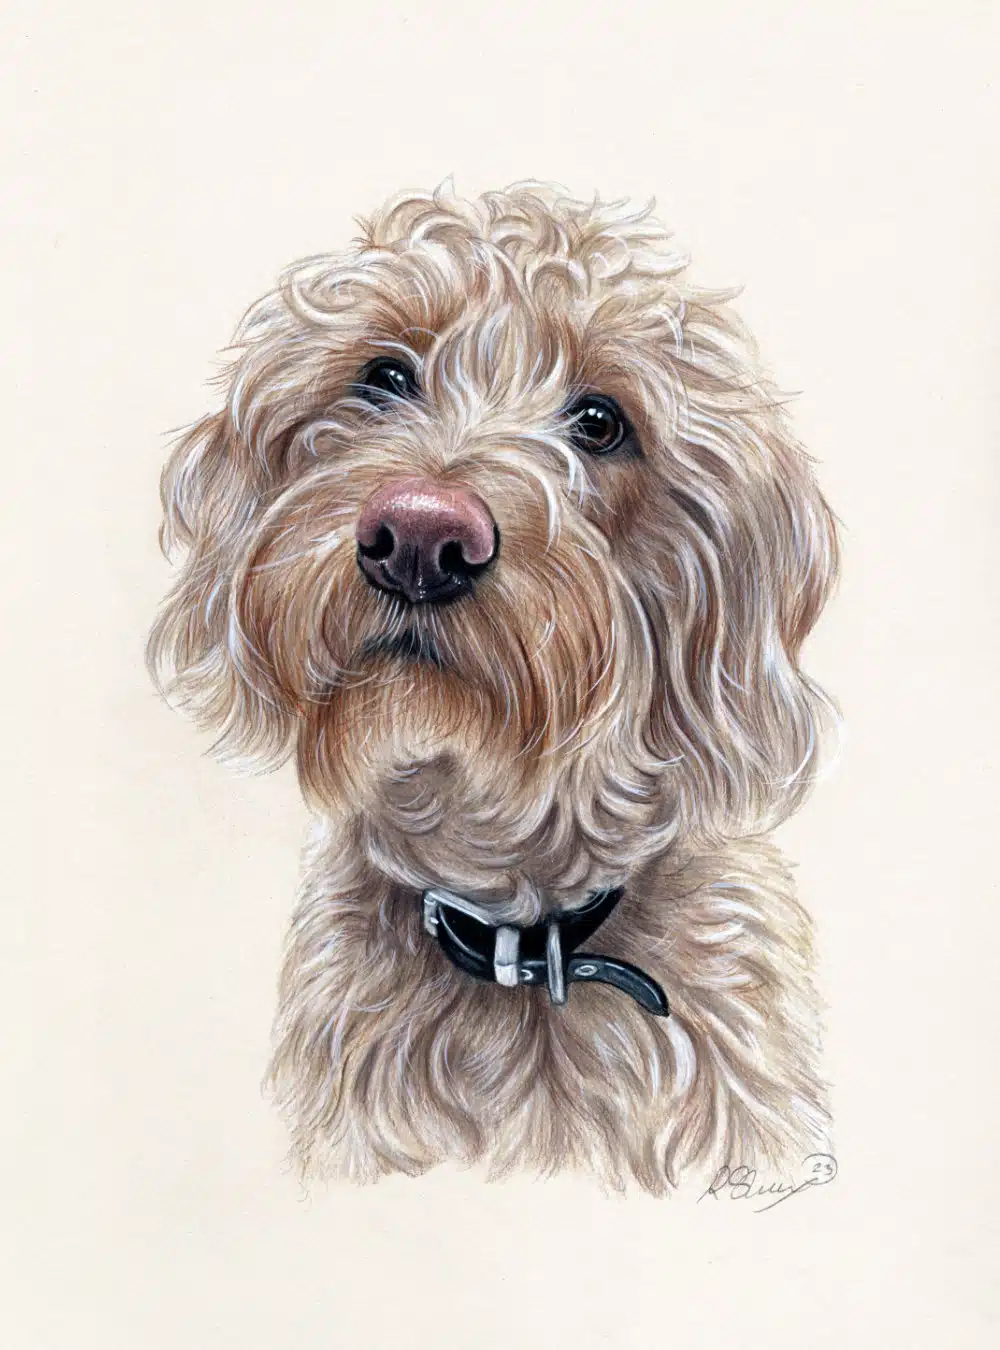 Featured image for “Portrait of the Beloved Cockapoo”